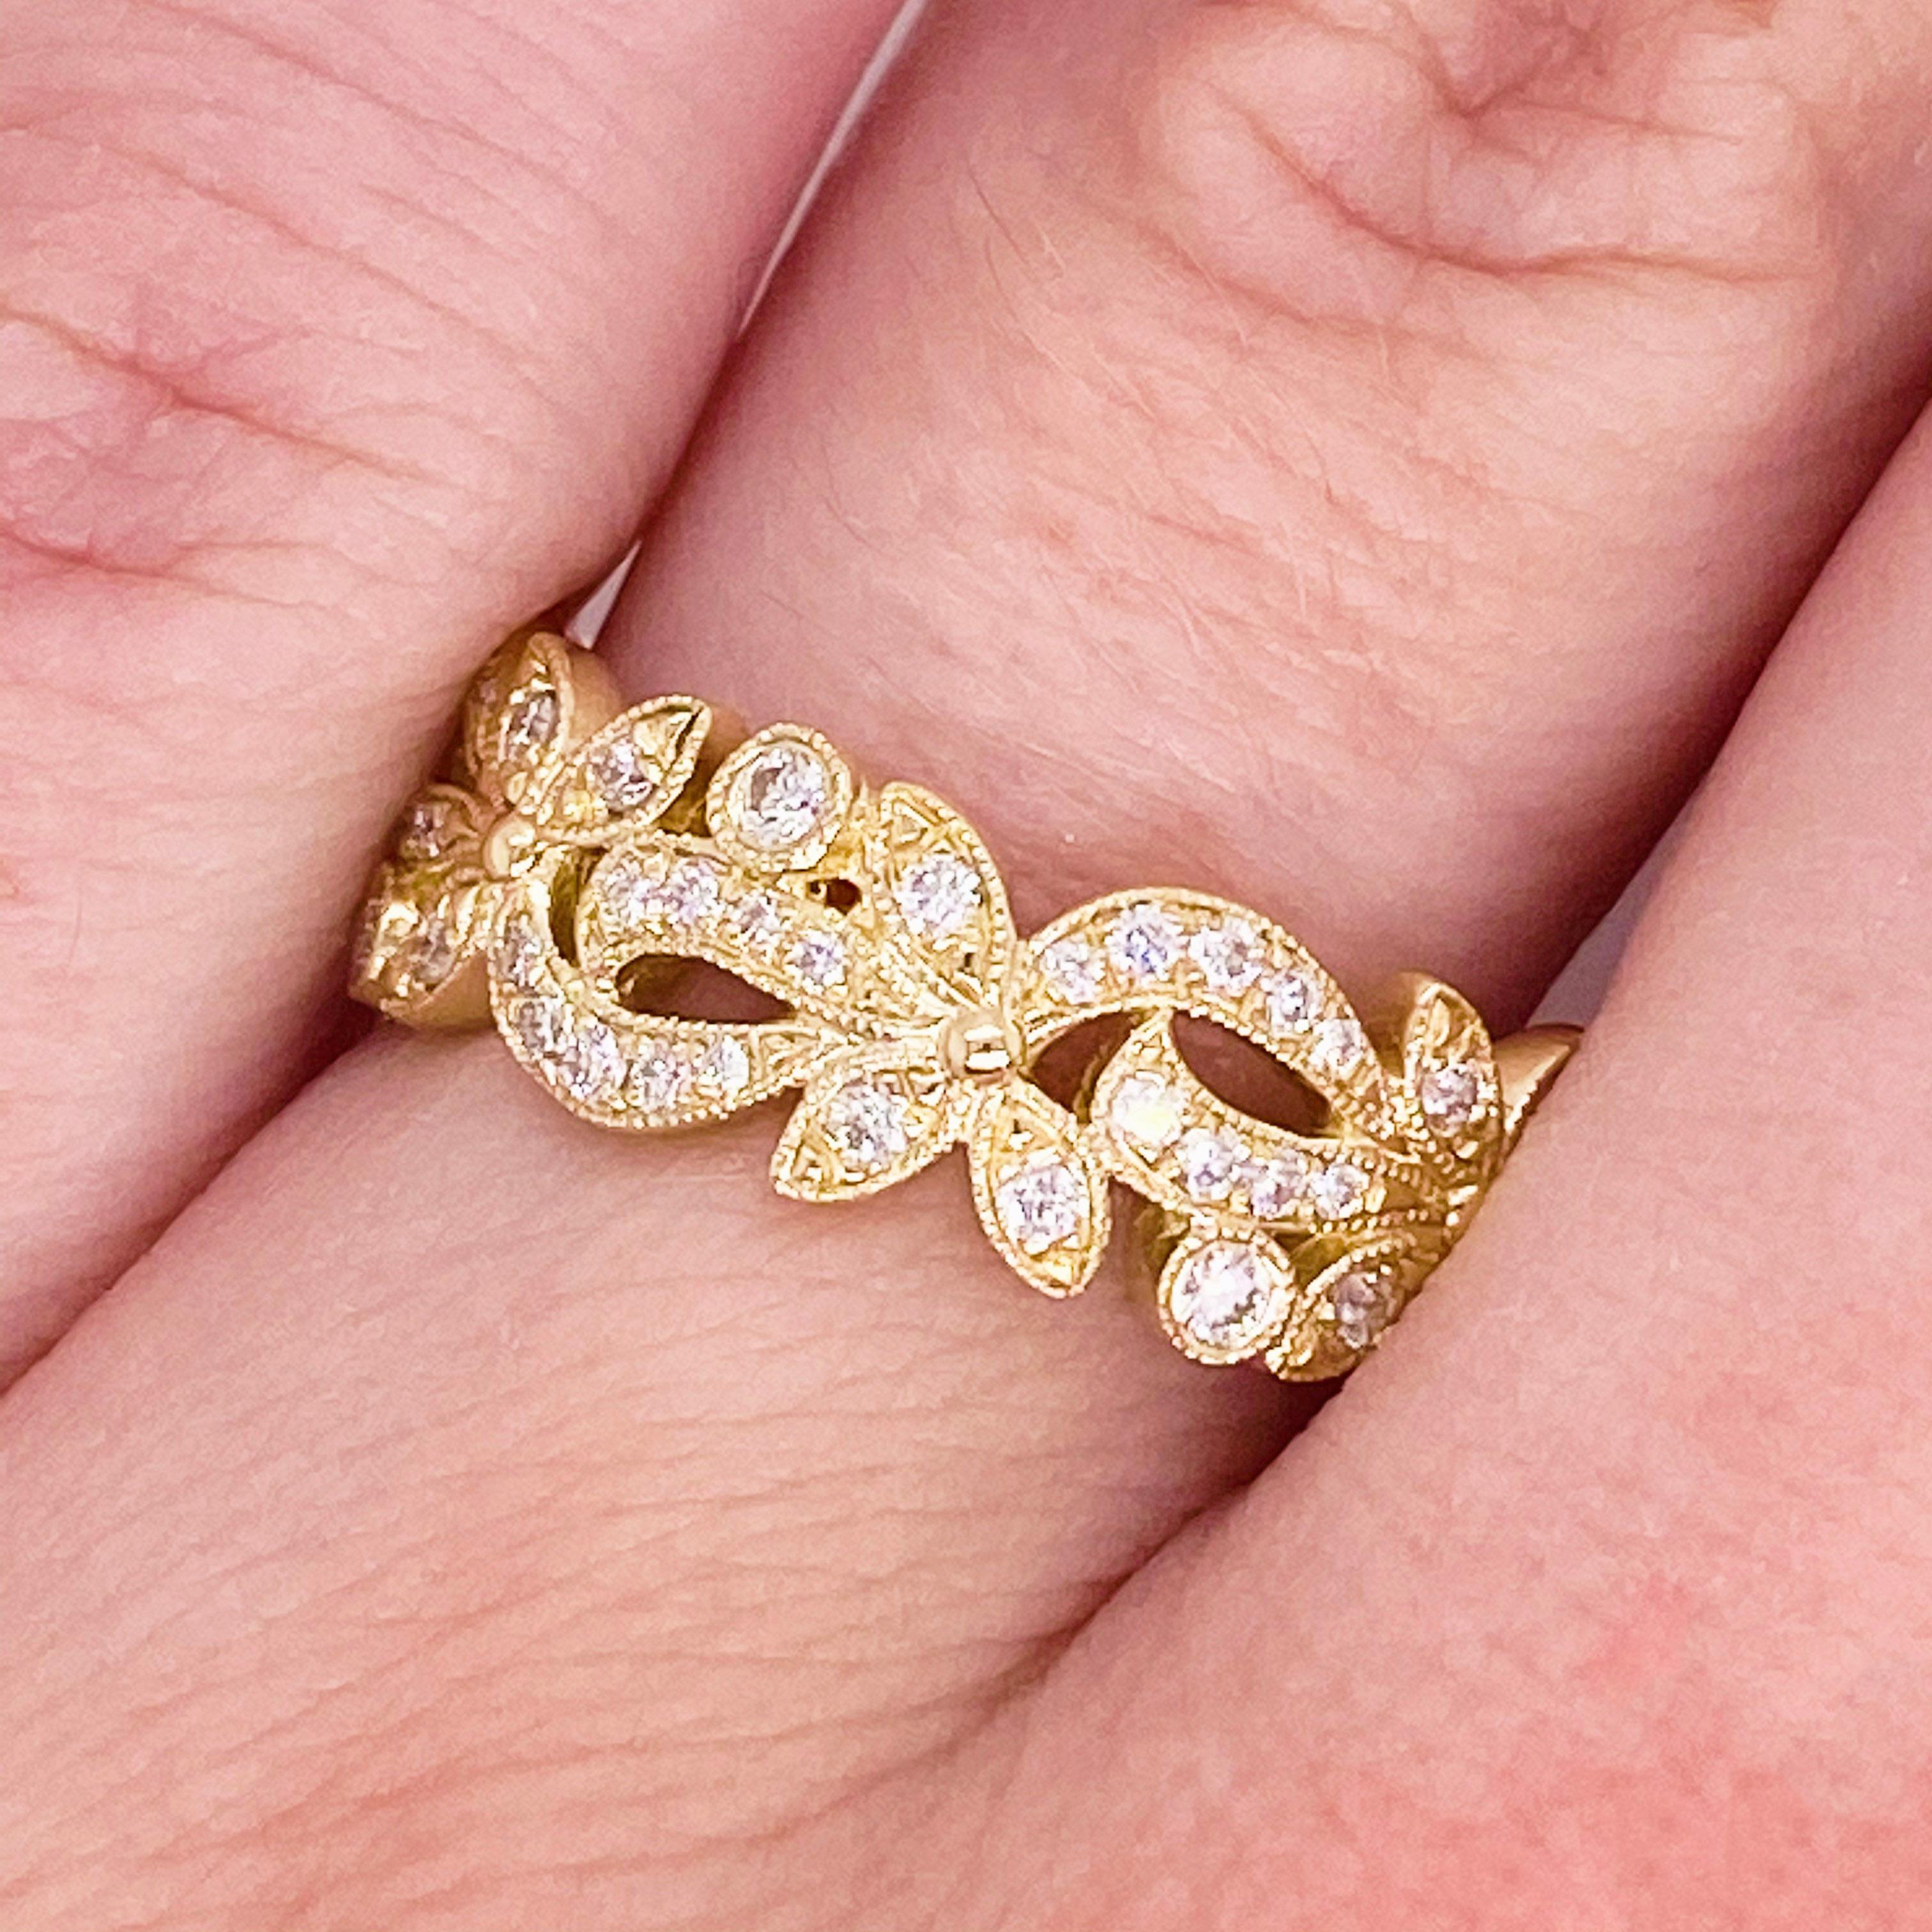 This lovely diamond band has gorgeous floral inspired detailing! Accented by lovely 14 karat yellow gold, this ring is an amazing fashion band and stackable band!  This pairs well with most engagement rings and wedding bands as well!  Treat yourself